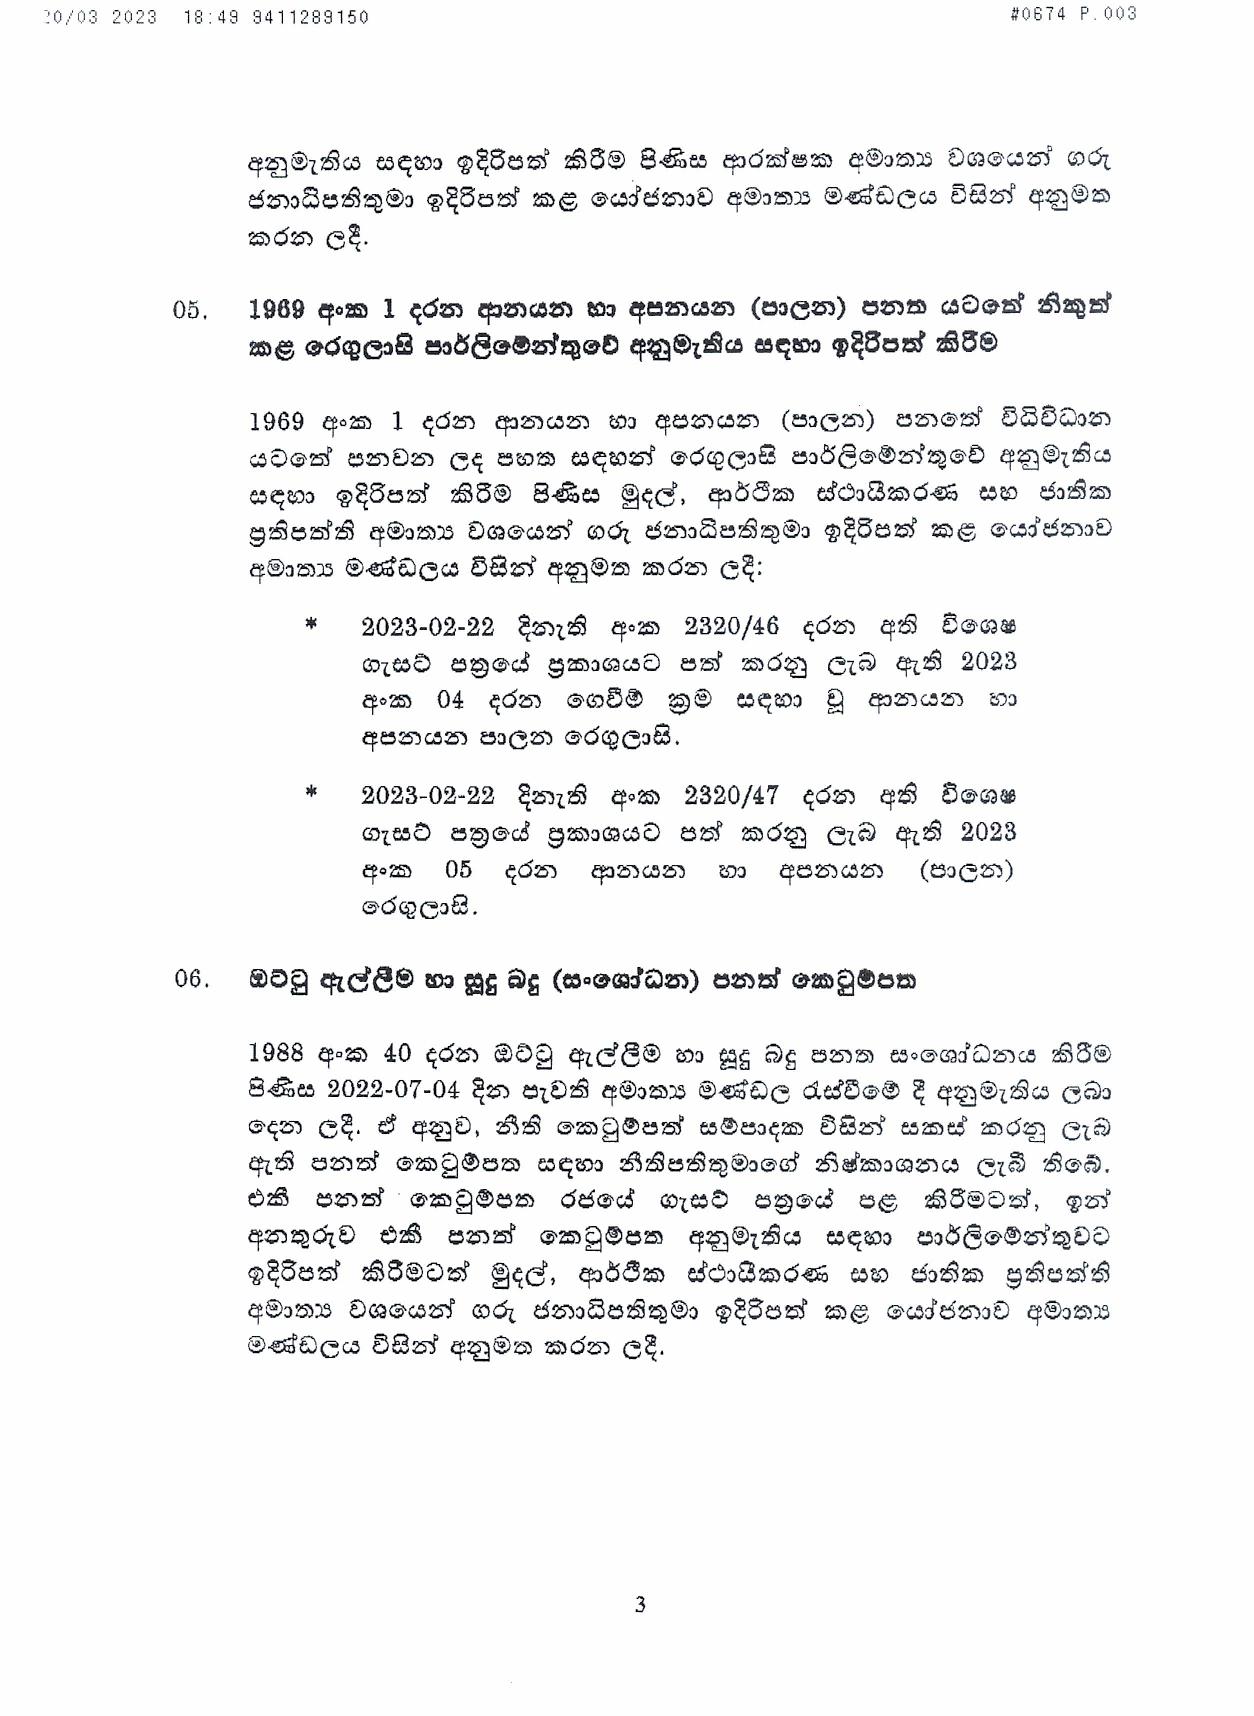 Cabinet Decision on 20.03.2023 page 003